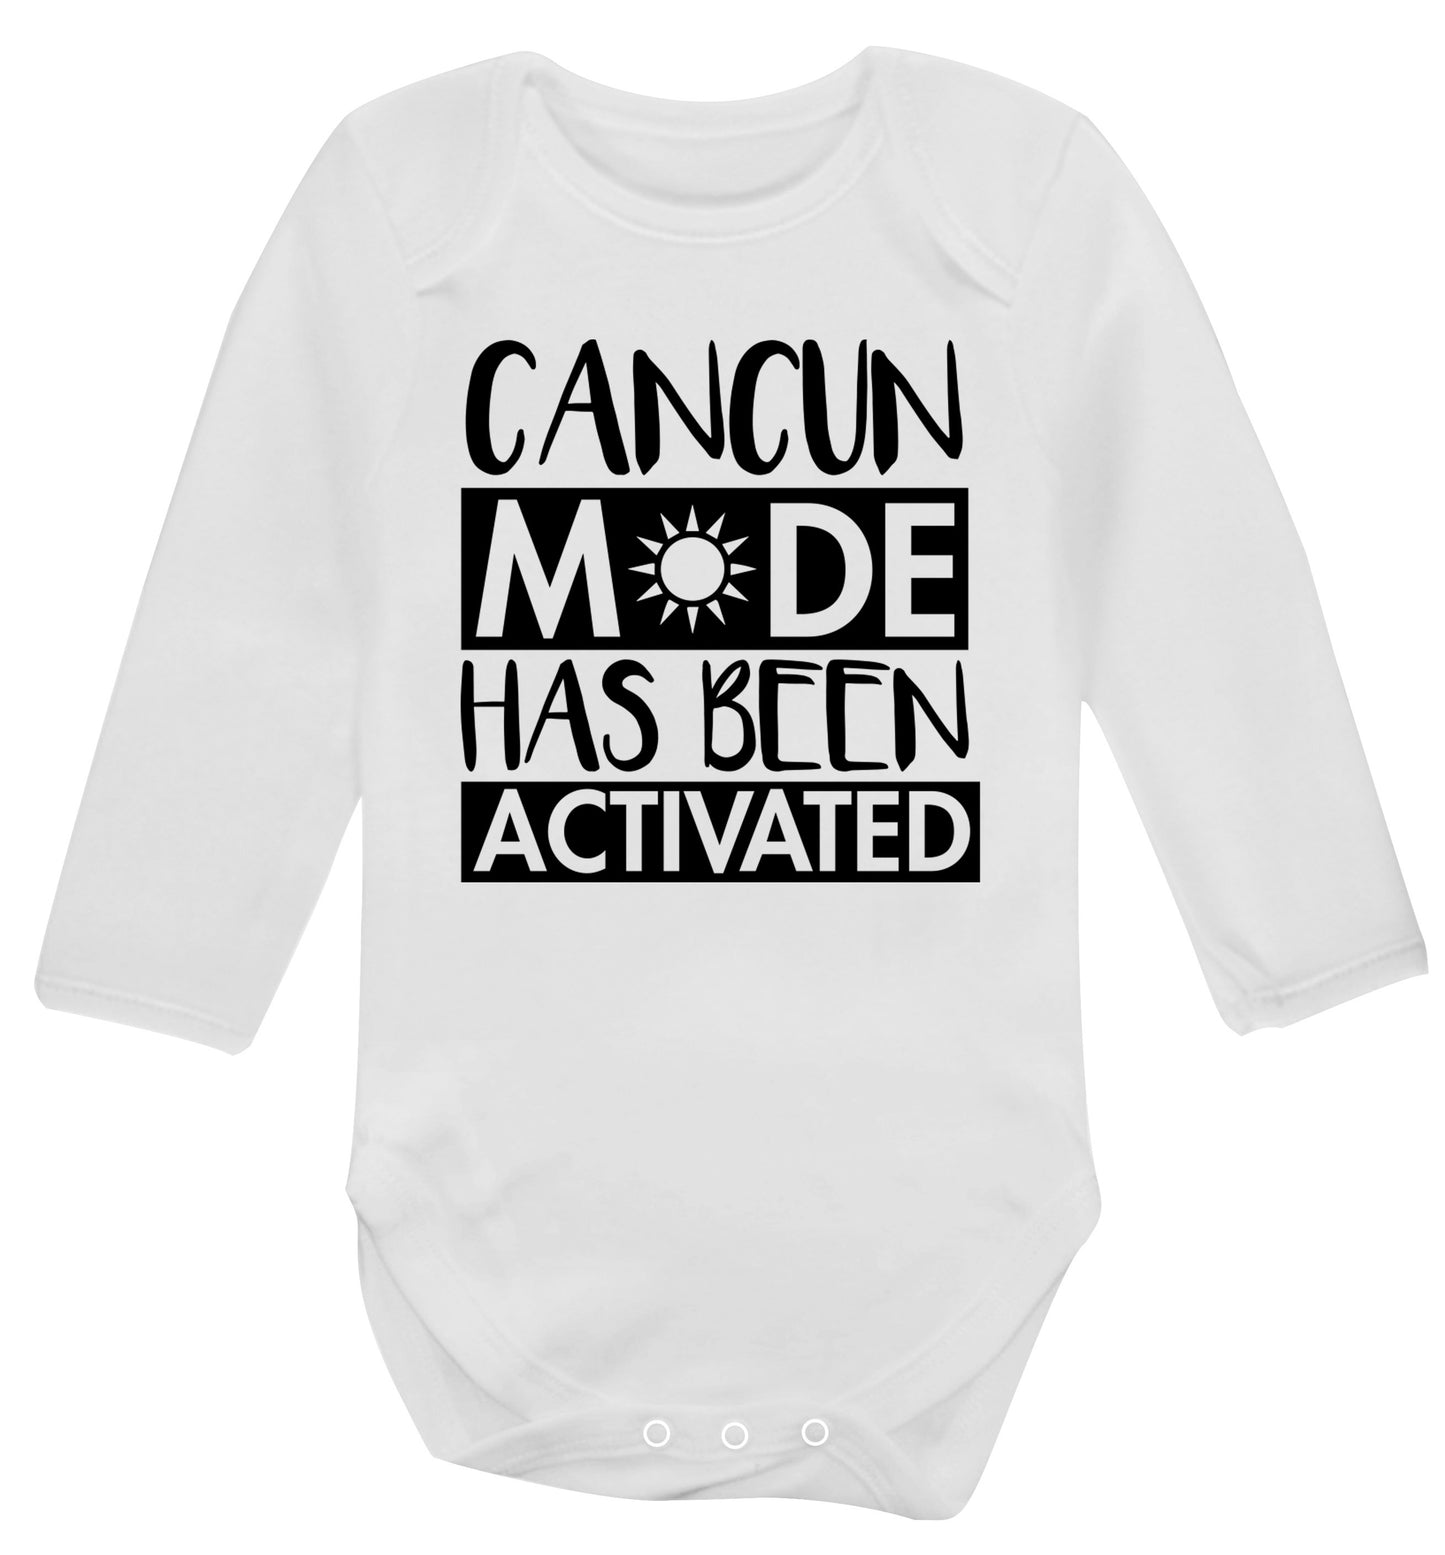 Cancun mode has been activated Baby Vest long sleeved white 6-12 months